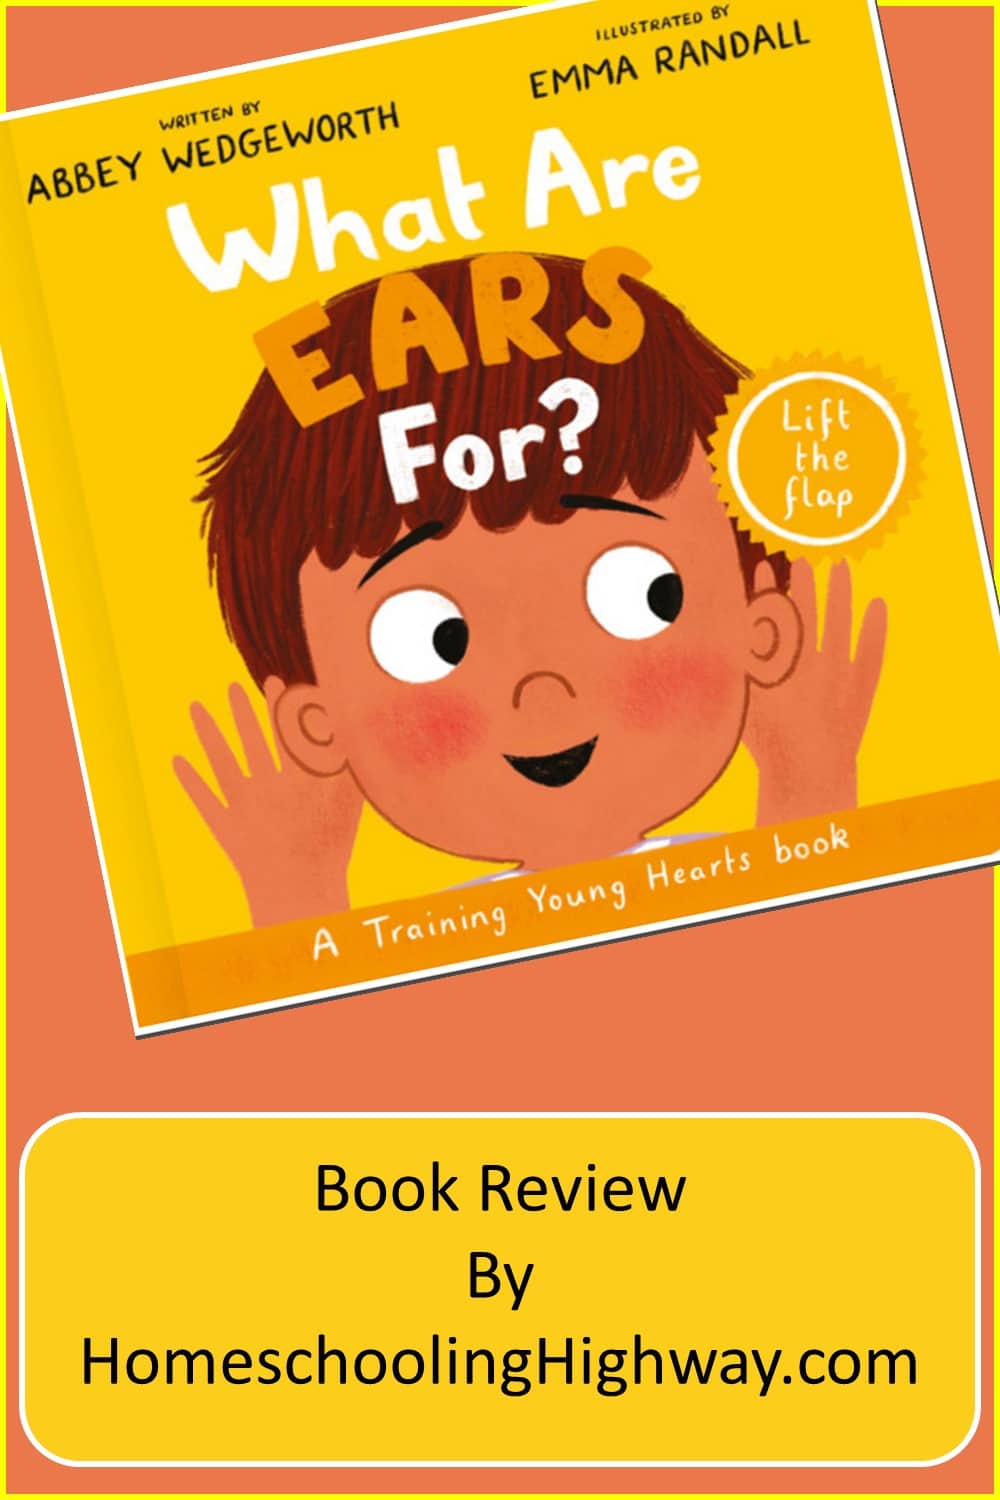 What are Ears for? Written by Abbey Wedgeworth. Book reviewed by HomeschoolHighway.com